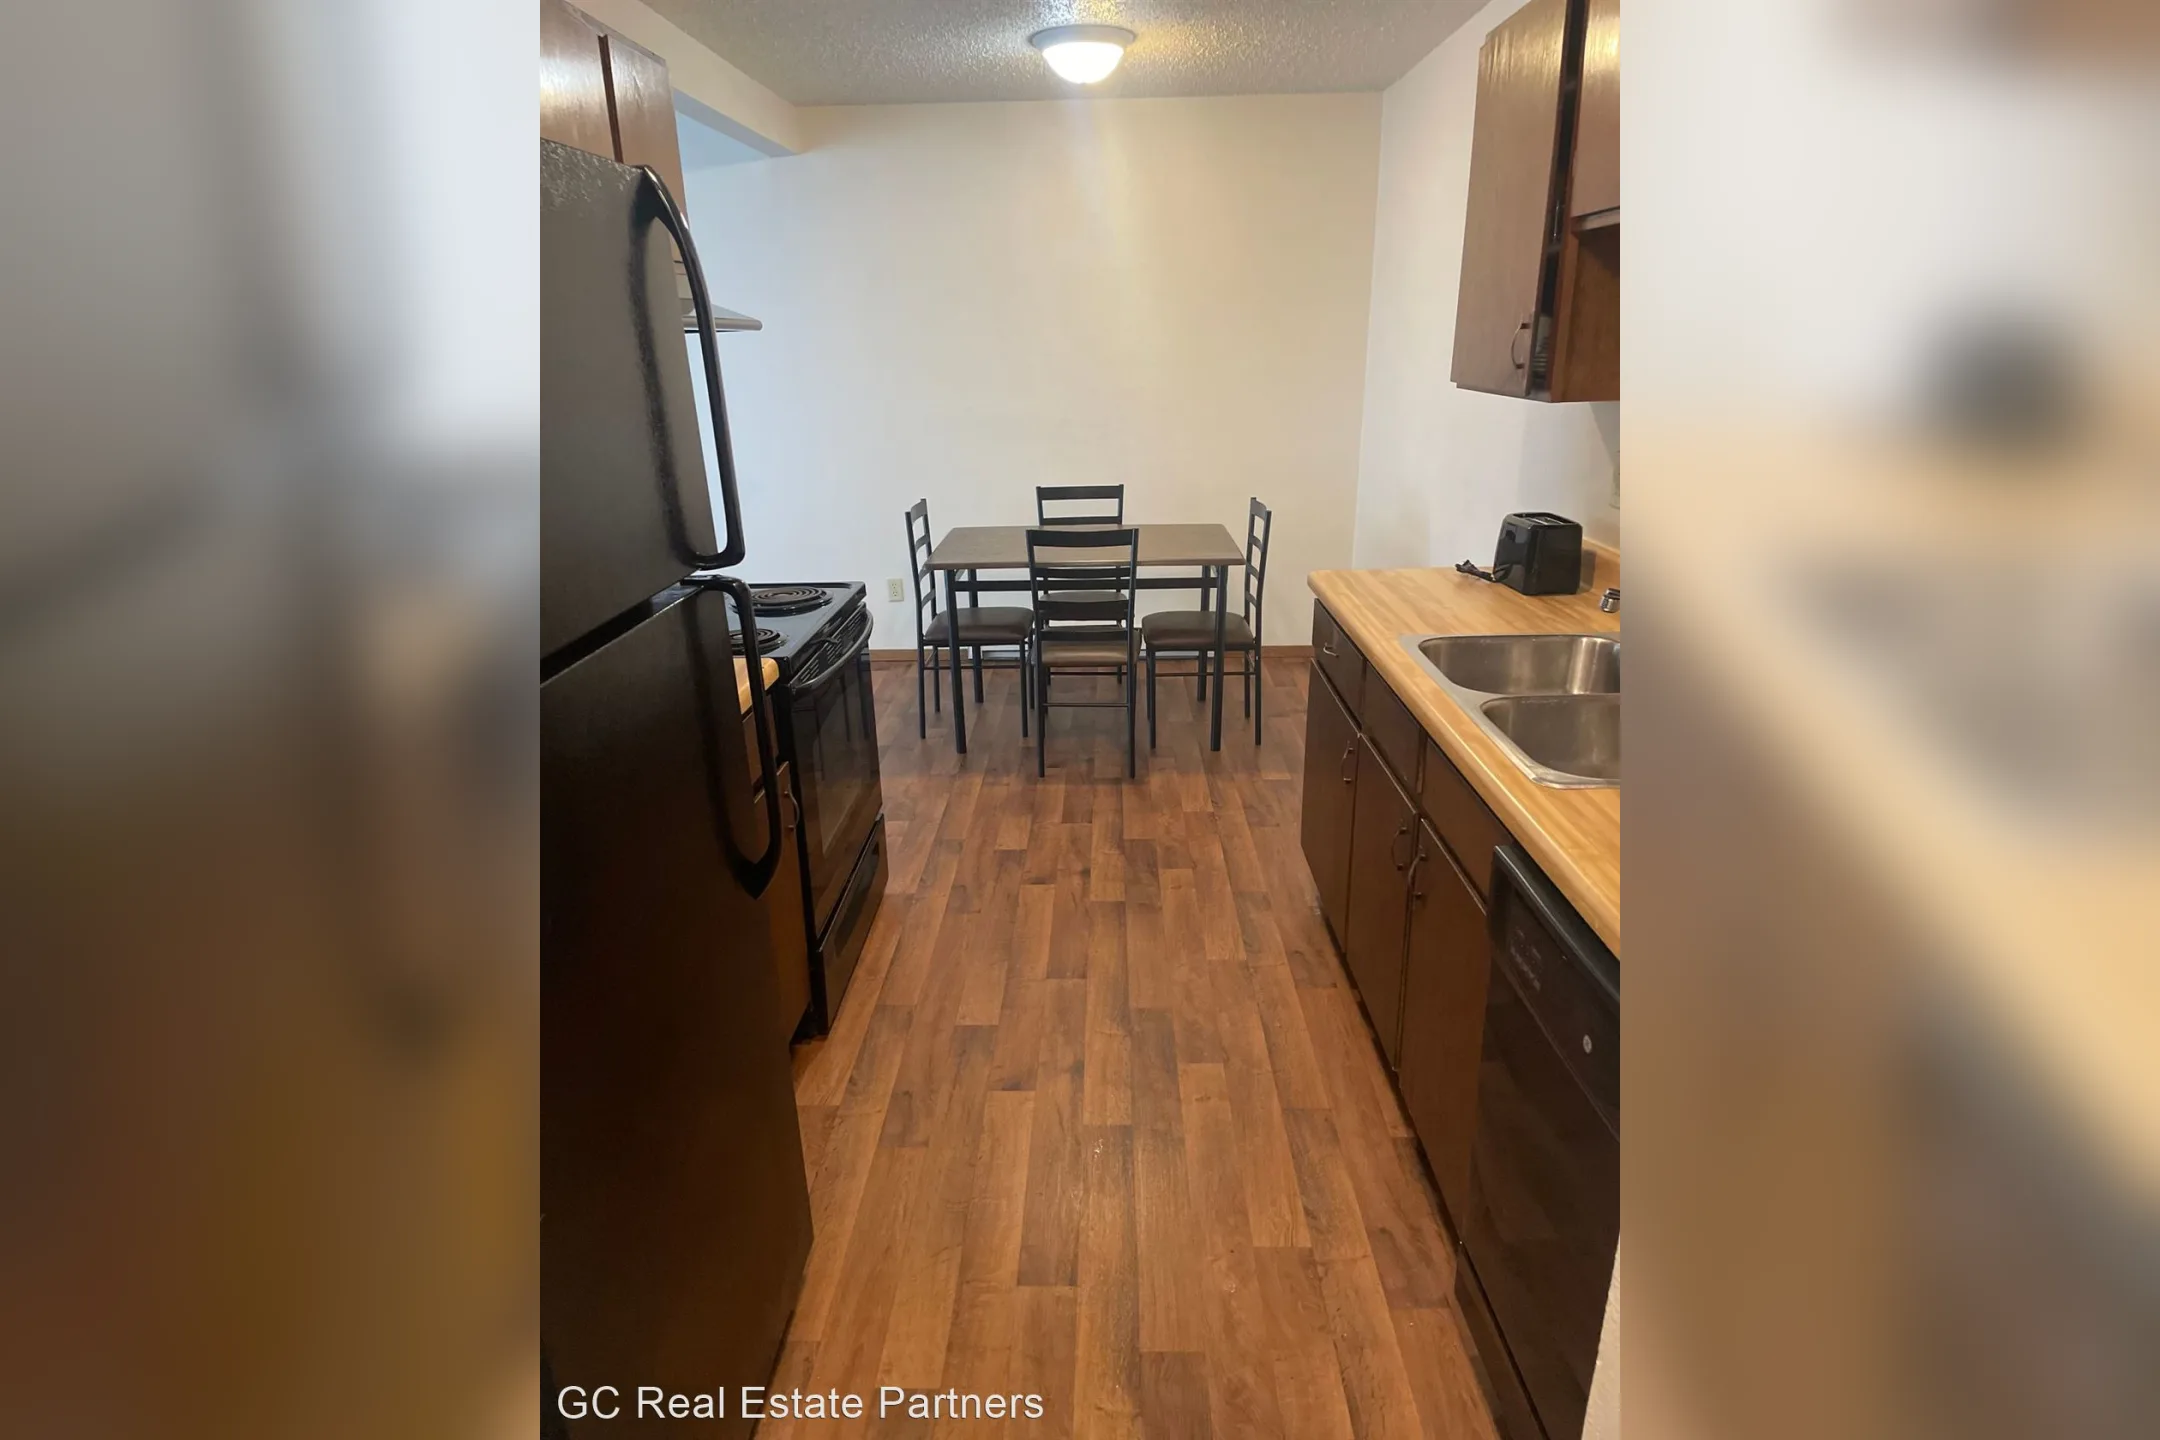 Dining Room - City Walk Apartments - Dickinson, ND